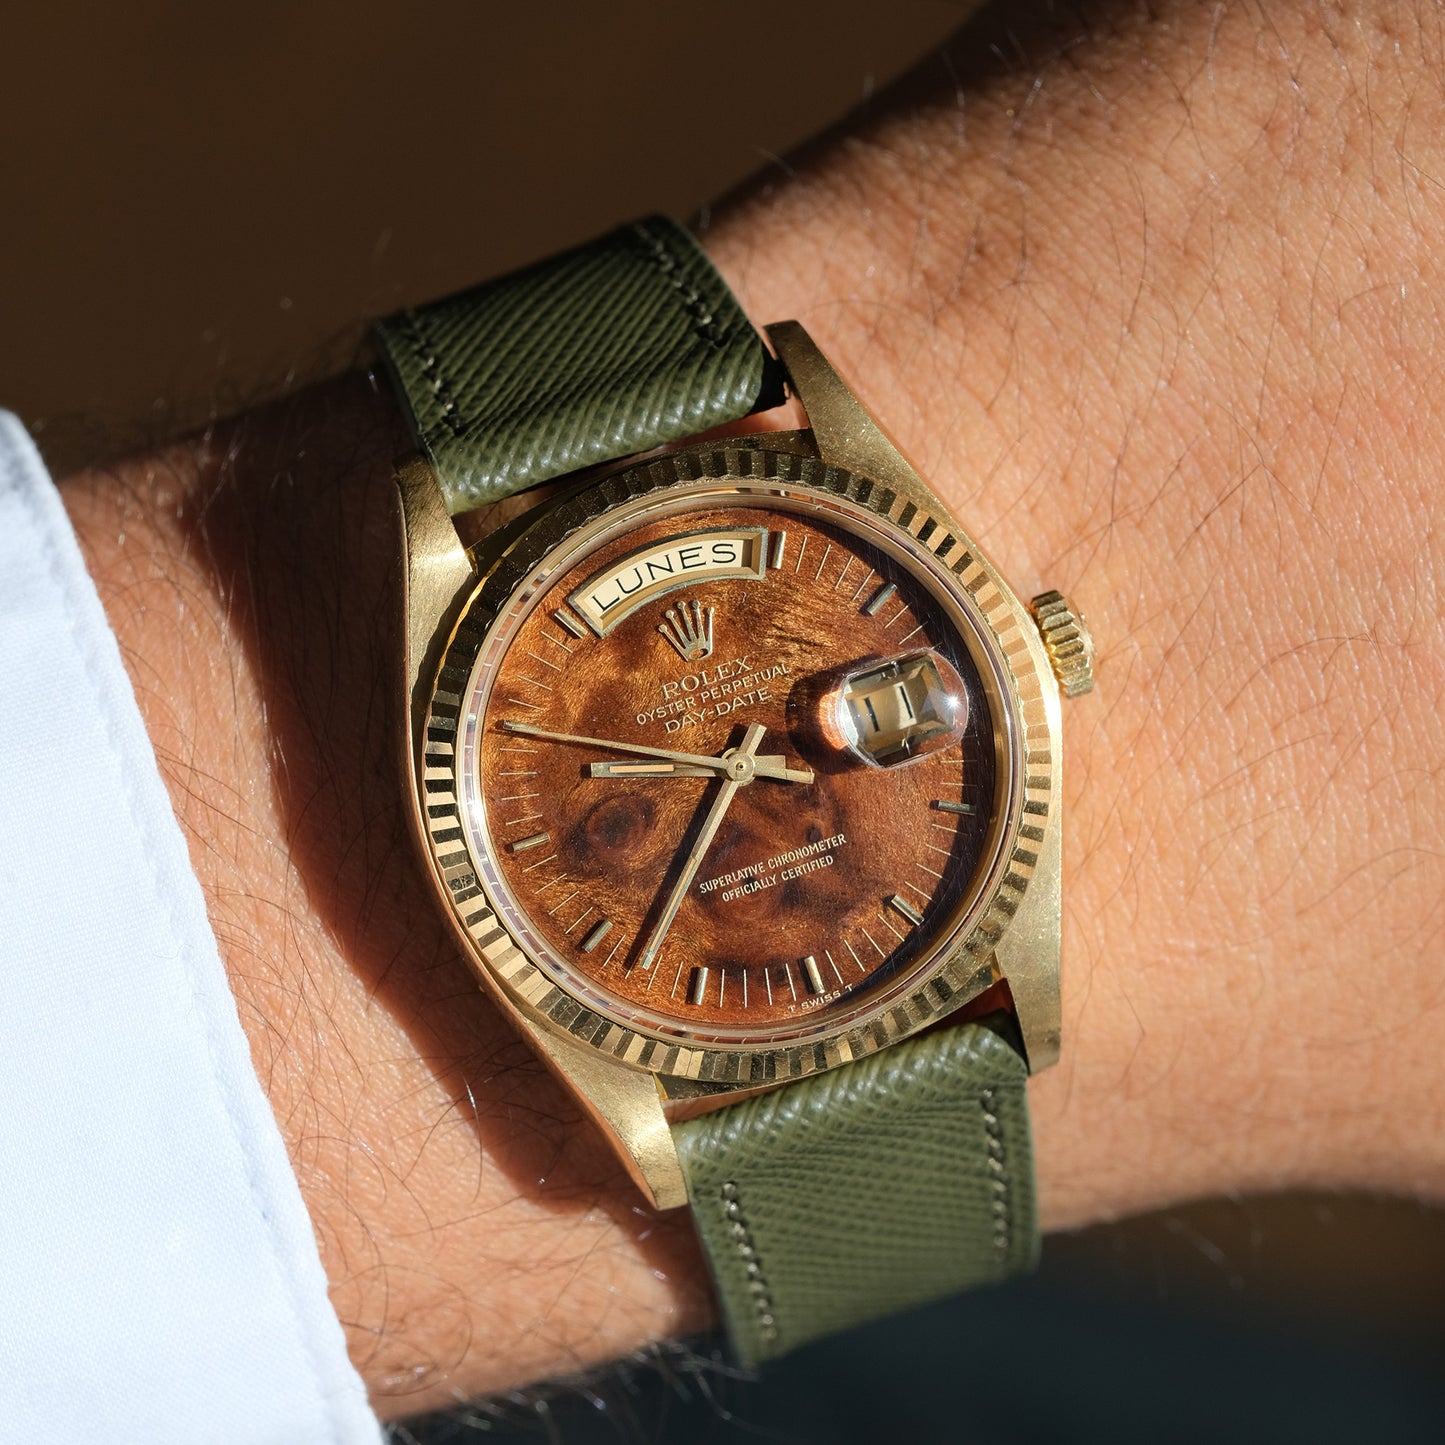 Rolex Day-Date 18038 Wood Dial from 1980